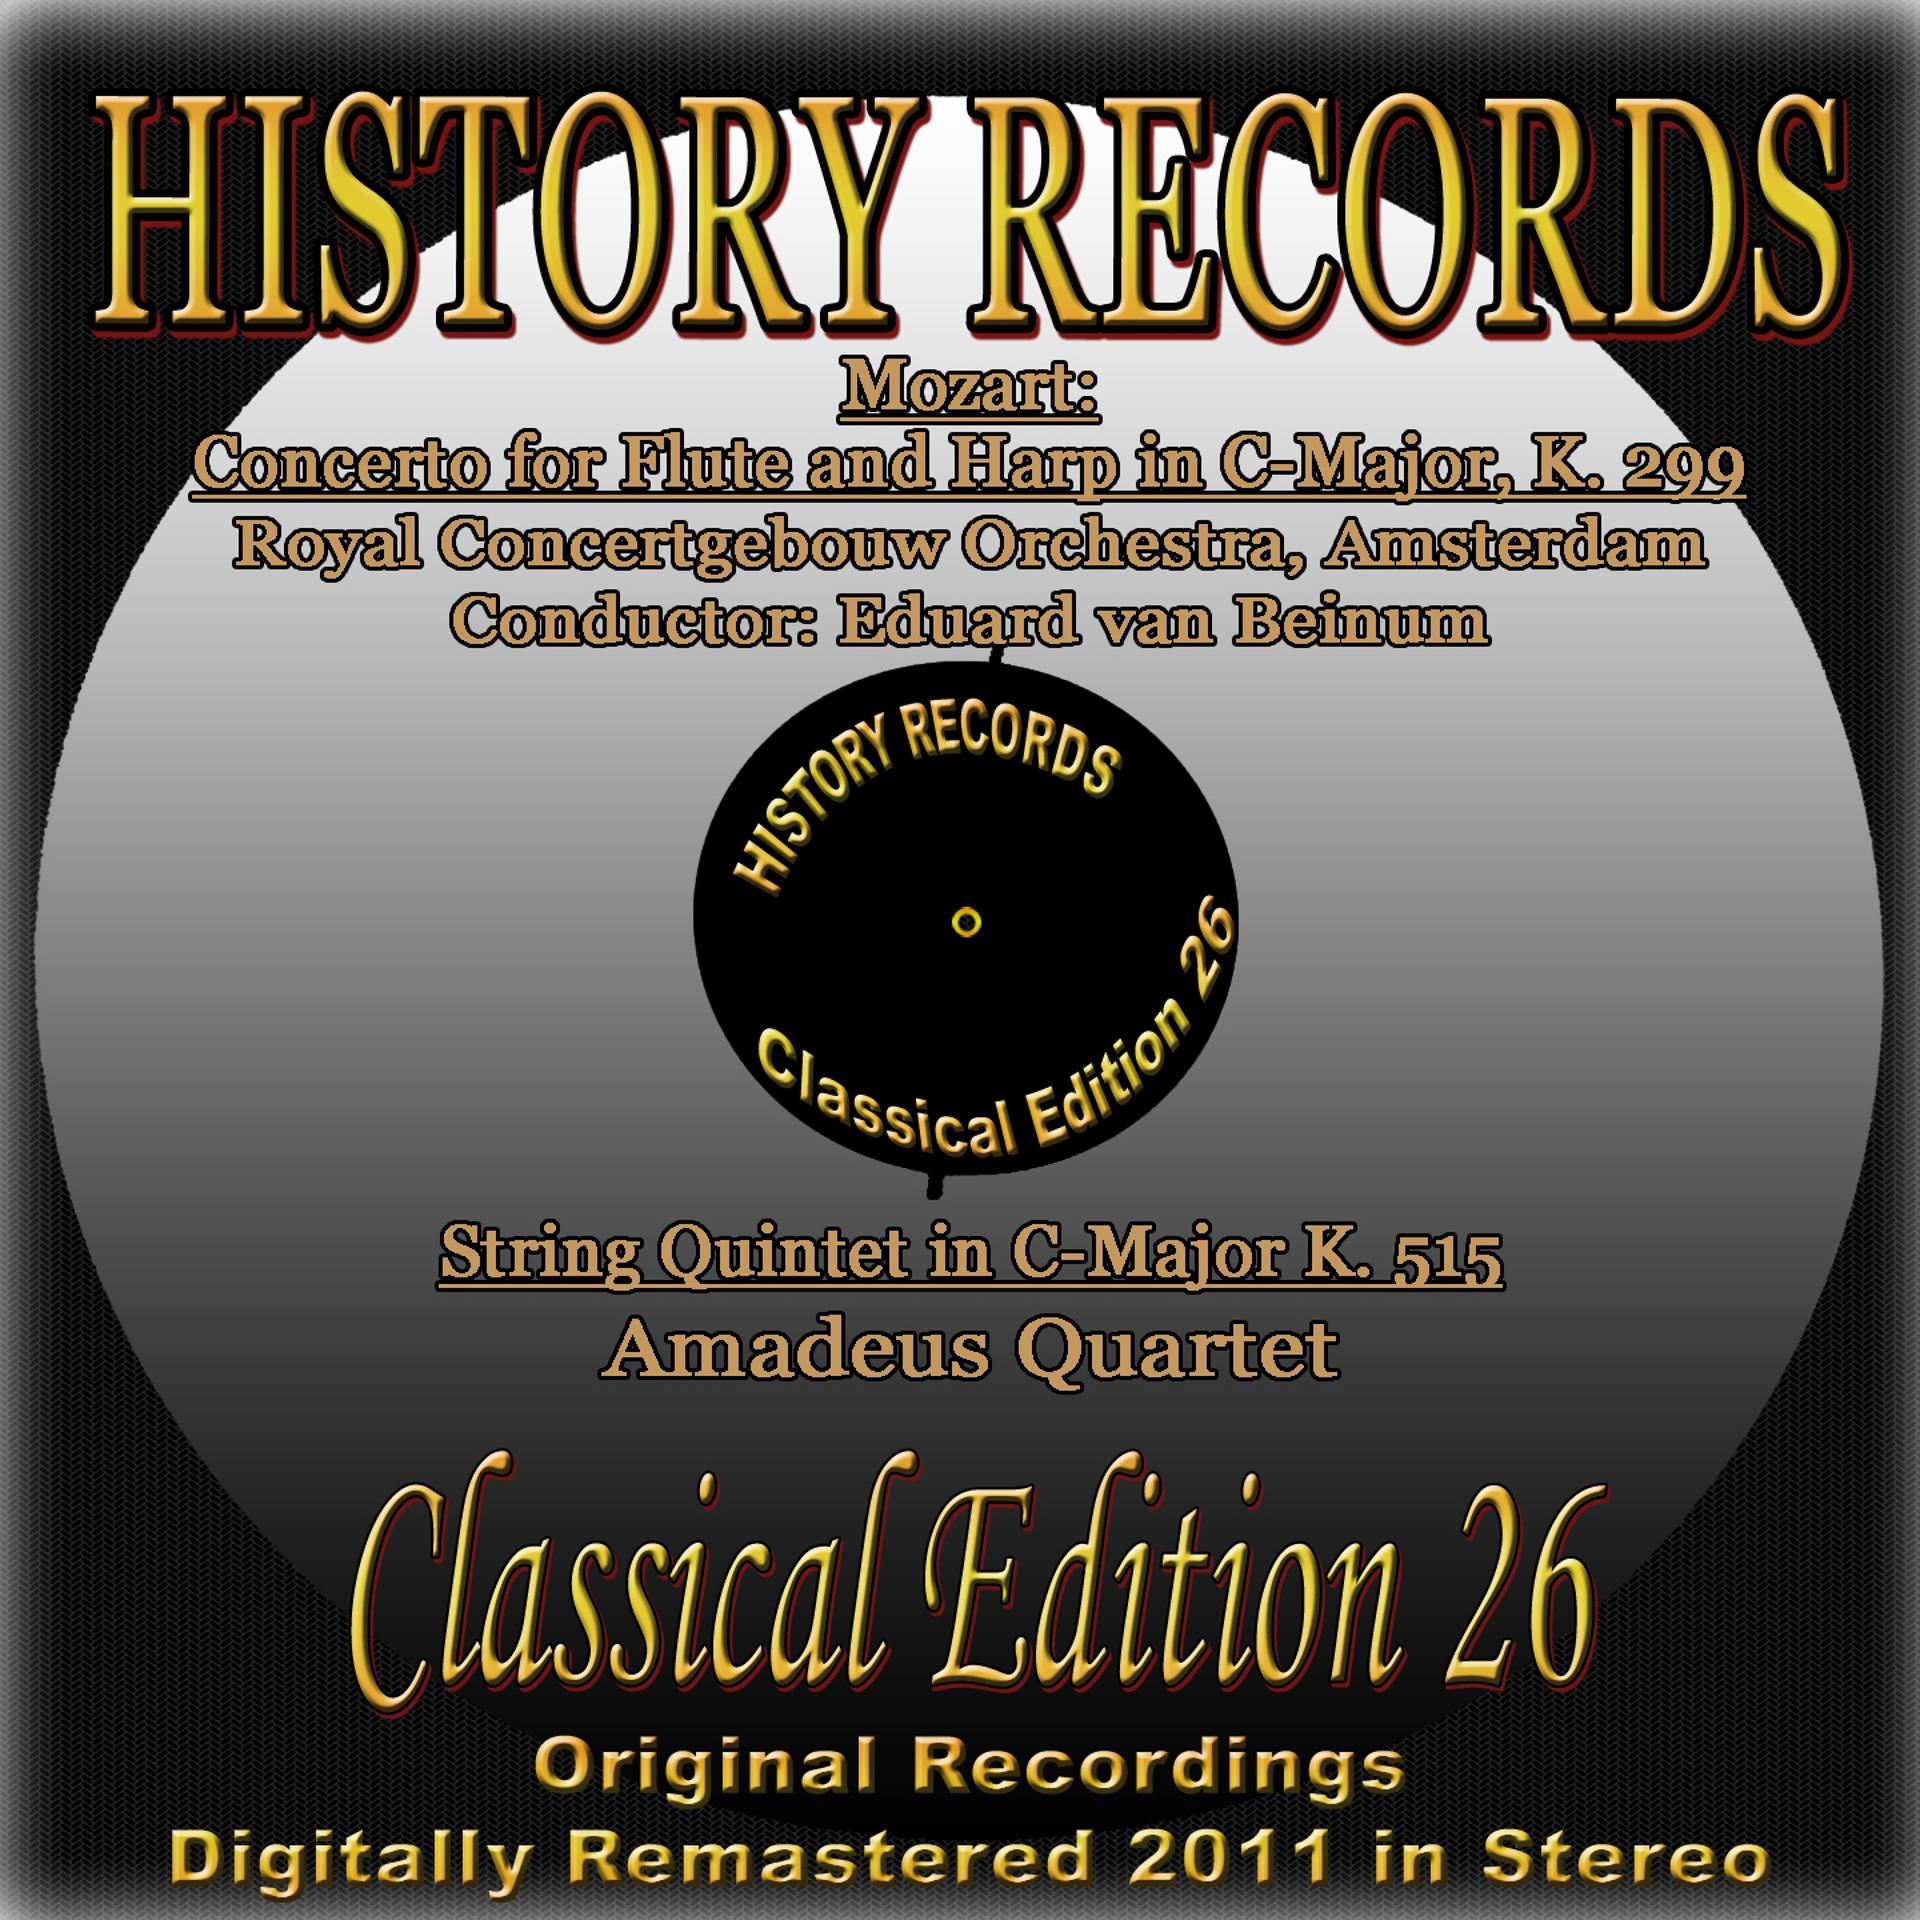 Постер альбома Mozart: Concerto for Flute and Harp in C Major, K. 299 & String Quintet in C Major K. 515 (History Records - Classical Edition 26 - Original Recordings Digitally Remastered 2011)